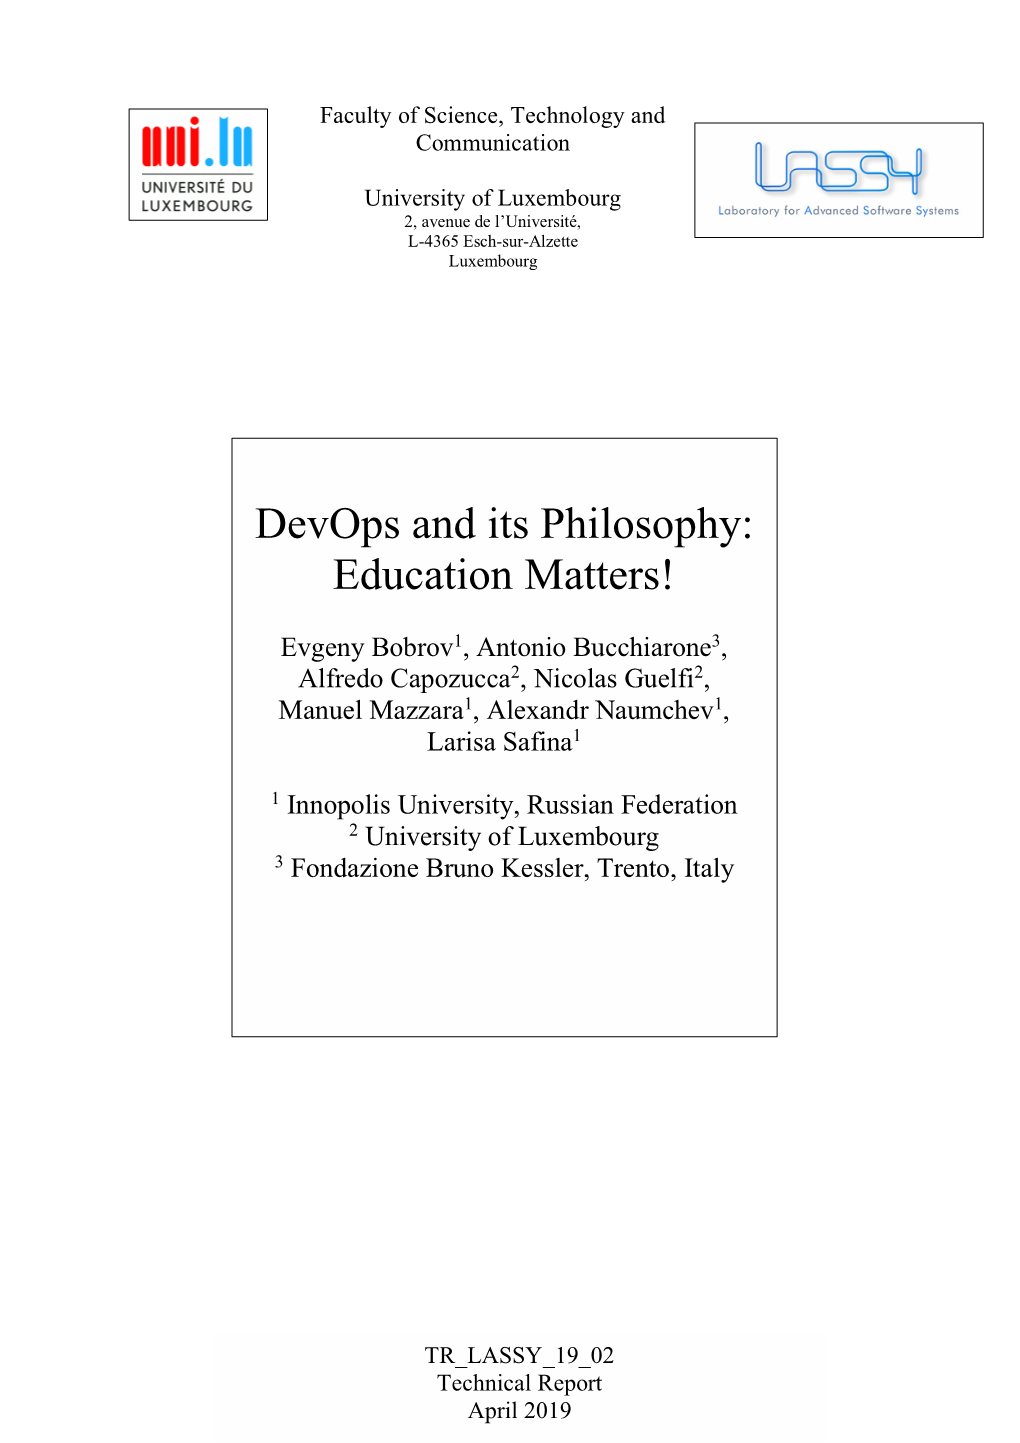 Devops and Its Philosophy: Education Matters!